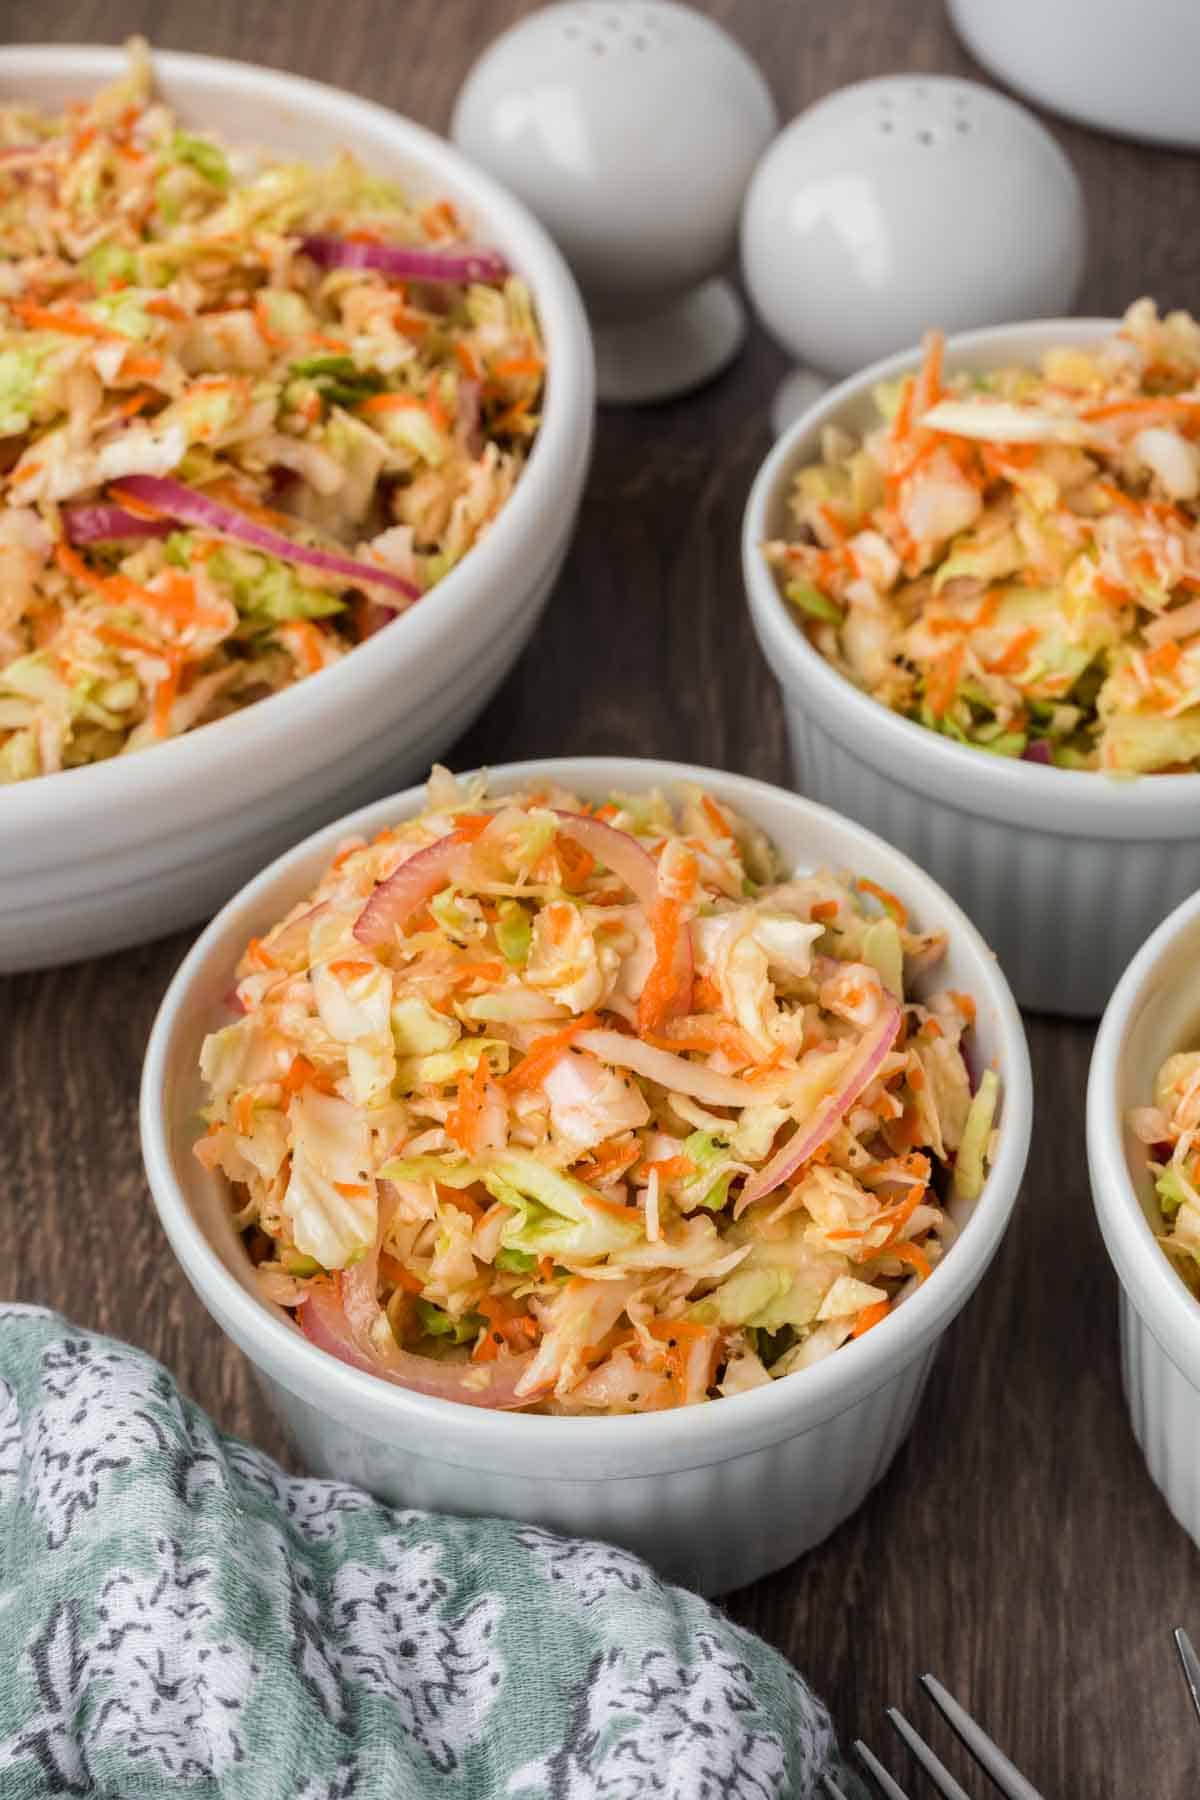 Vinegar Coleslaw in a bowls ready to serve